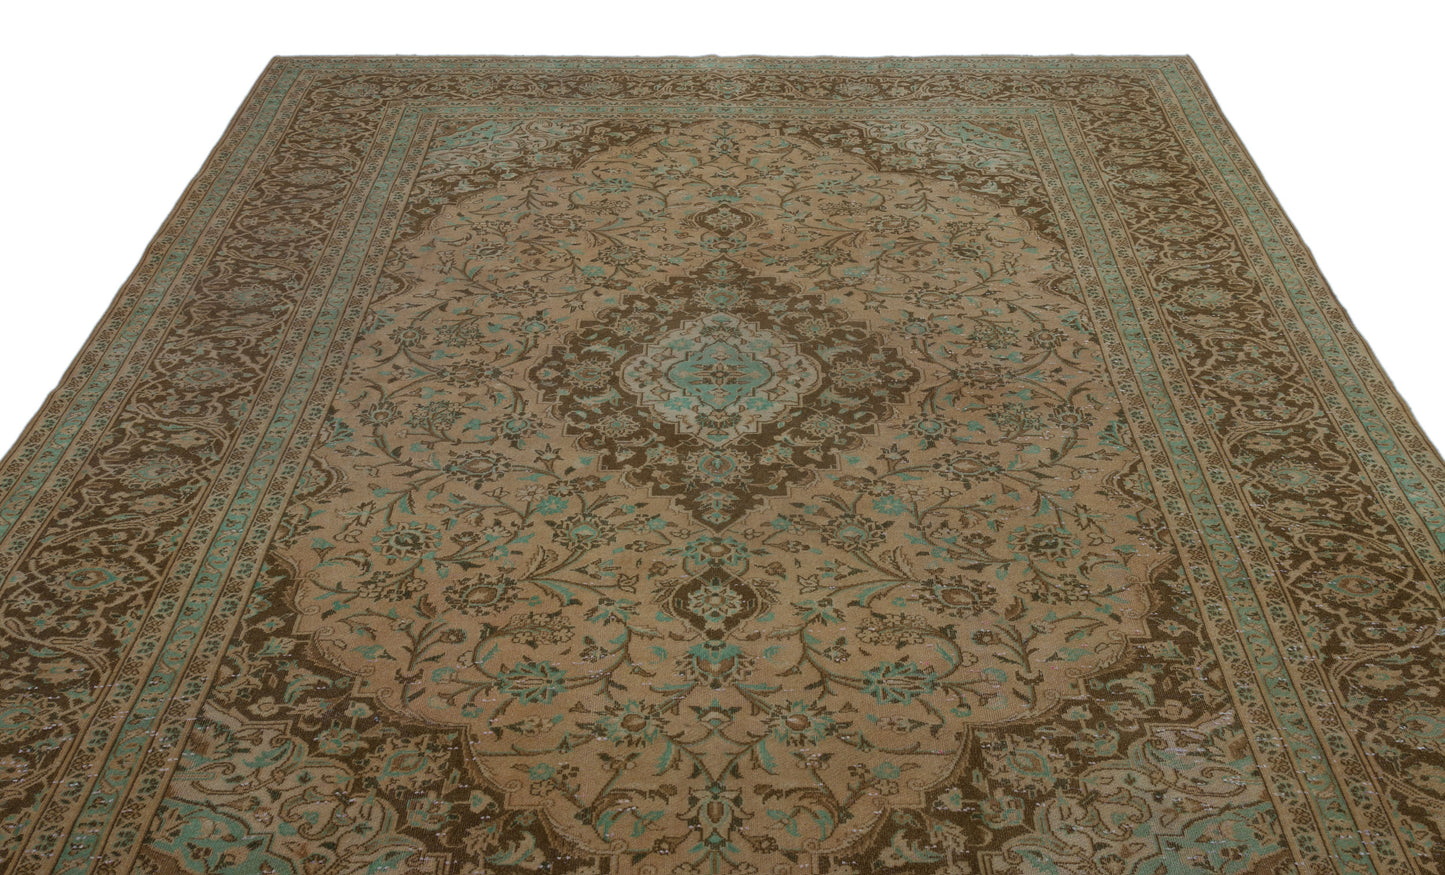 Vintage Rugs by Piginda: Timeless Beauty for Your Home,8'1" x 11'4"